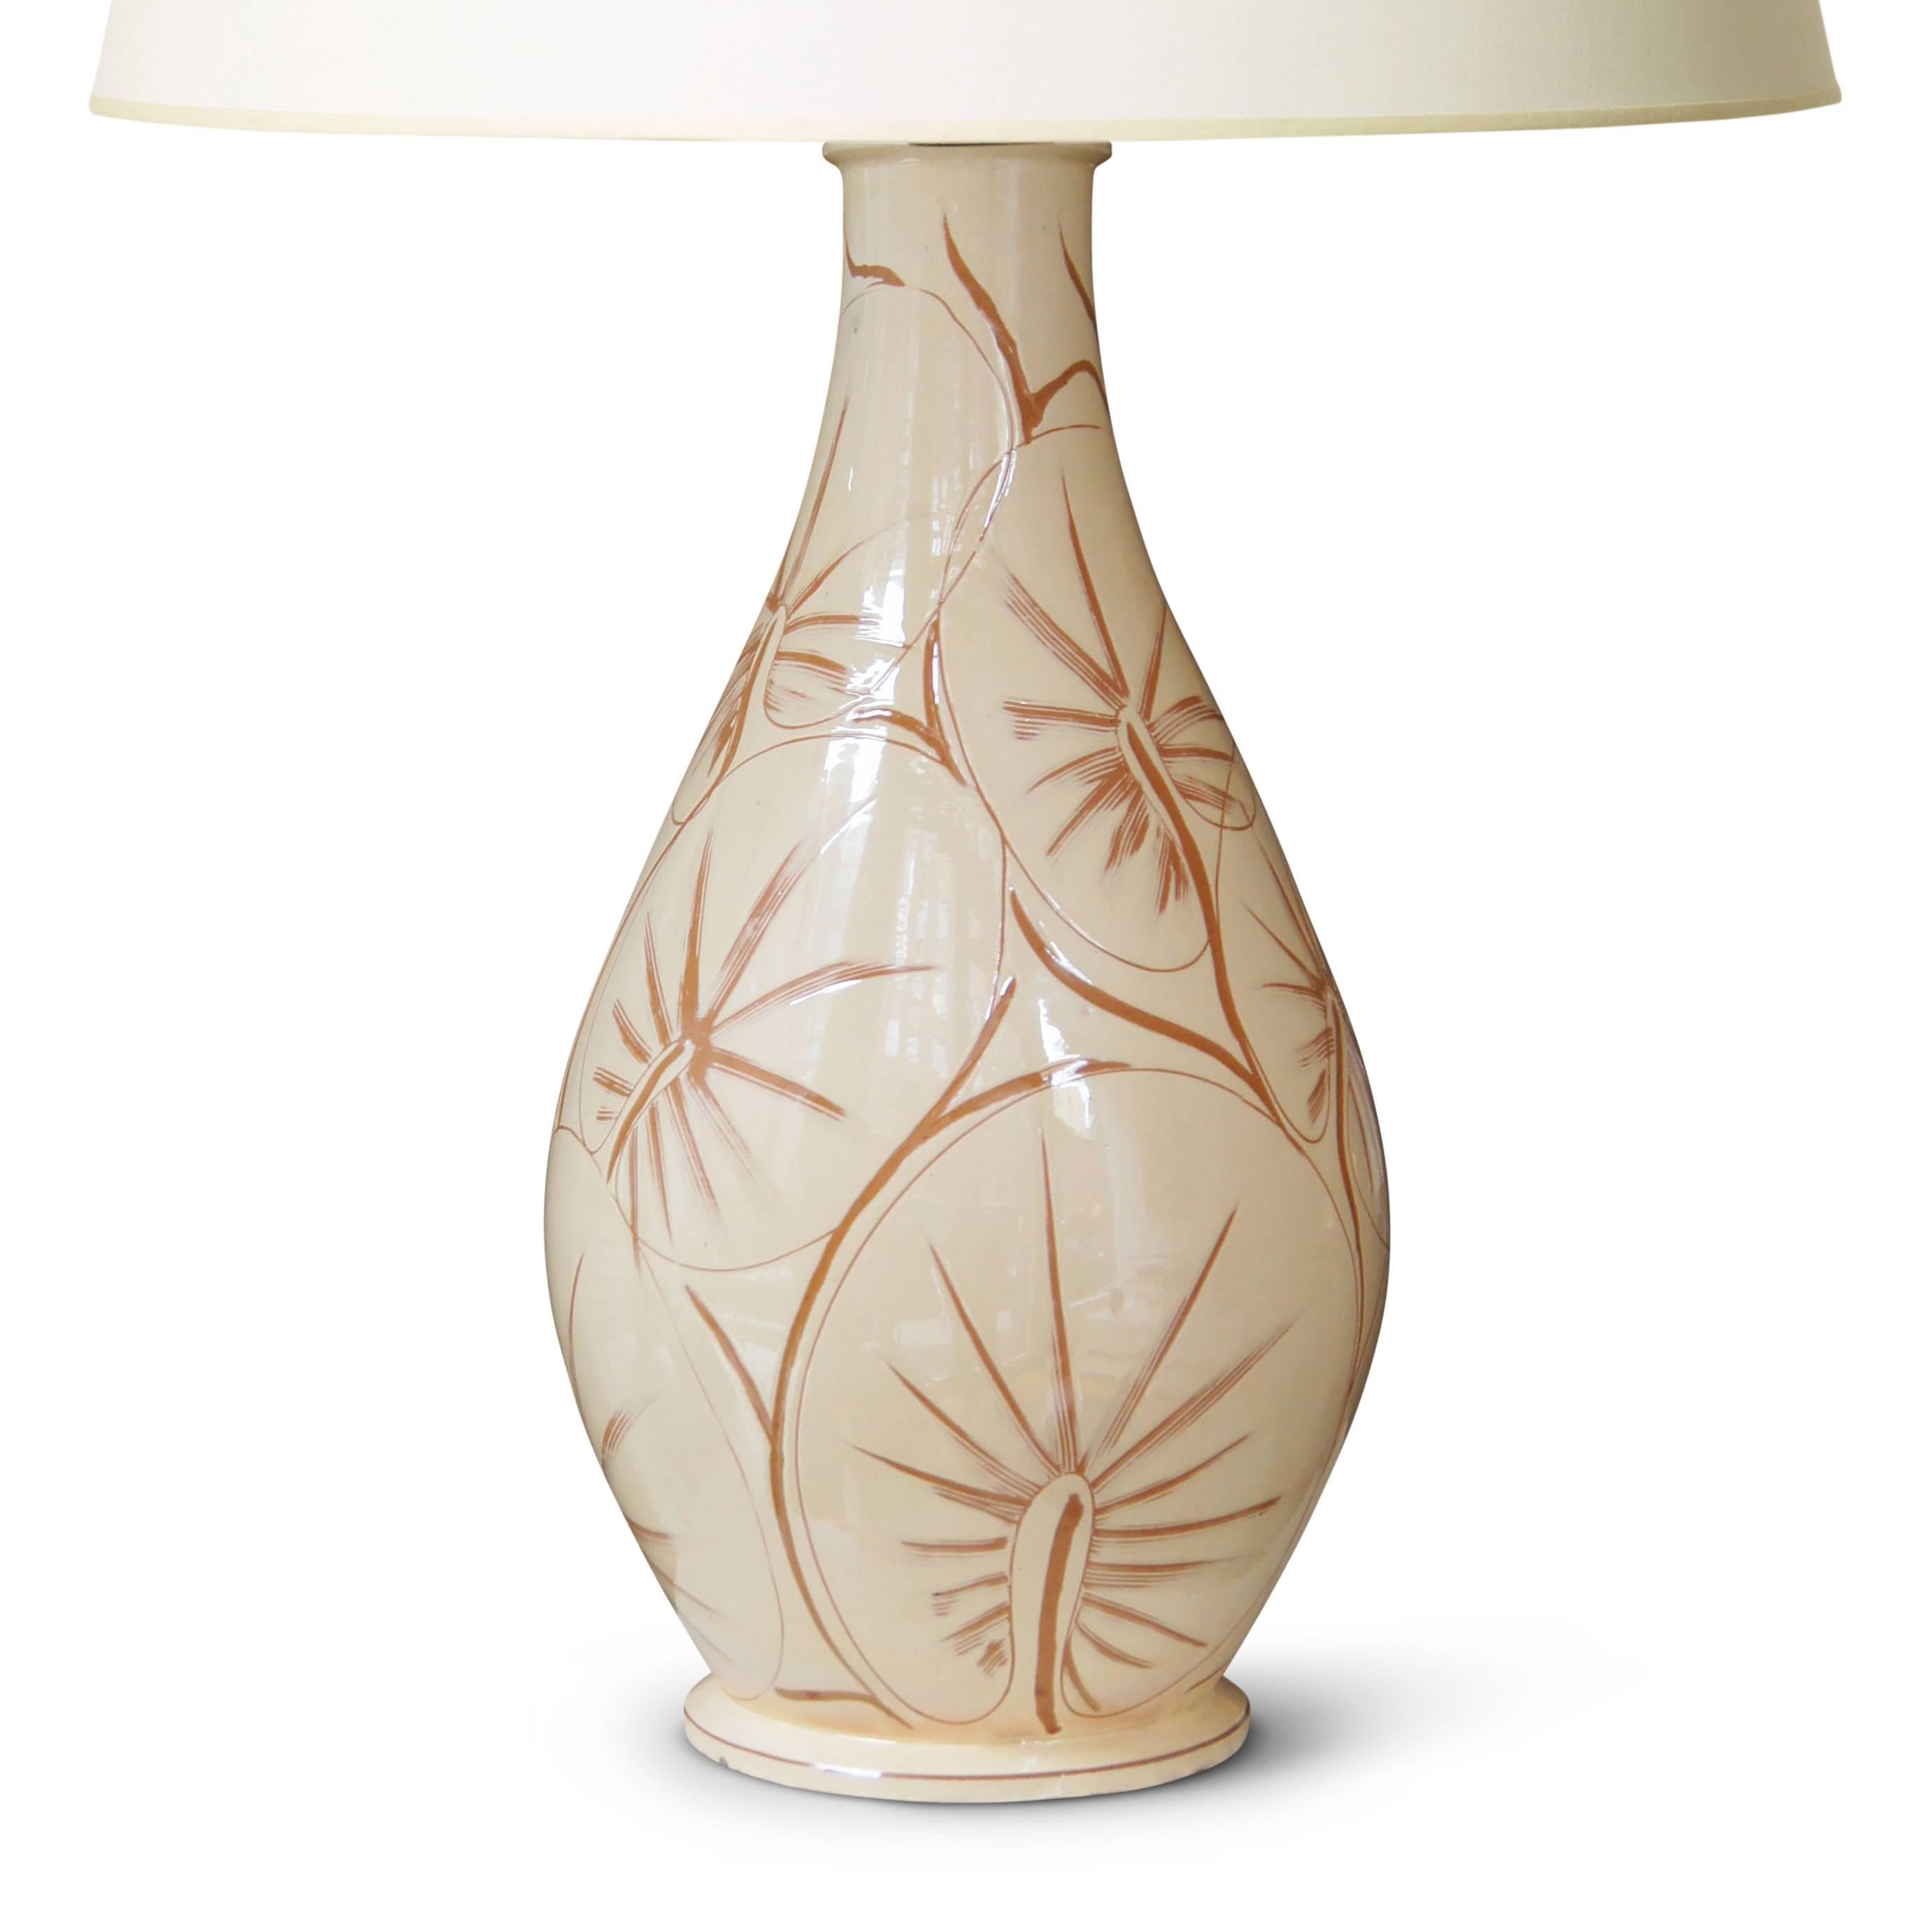 Monumental / tall table lamp with vase form by Kähler Keramik, in hand-turned earthenware, glazed in ivory and incised with a vigorous and masterful sgraffito pattern of tropical leaves of an orbicular or palmate sort; Denmark, mid-20th century,